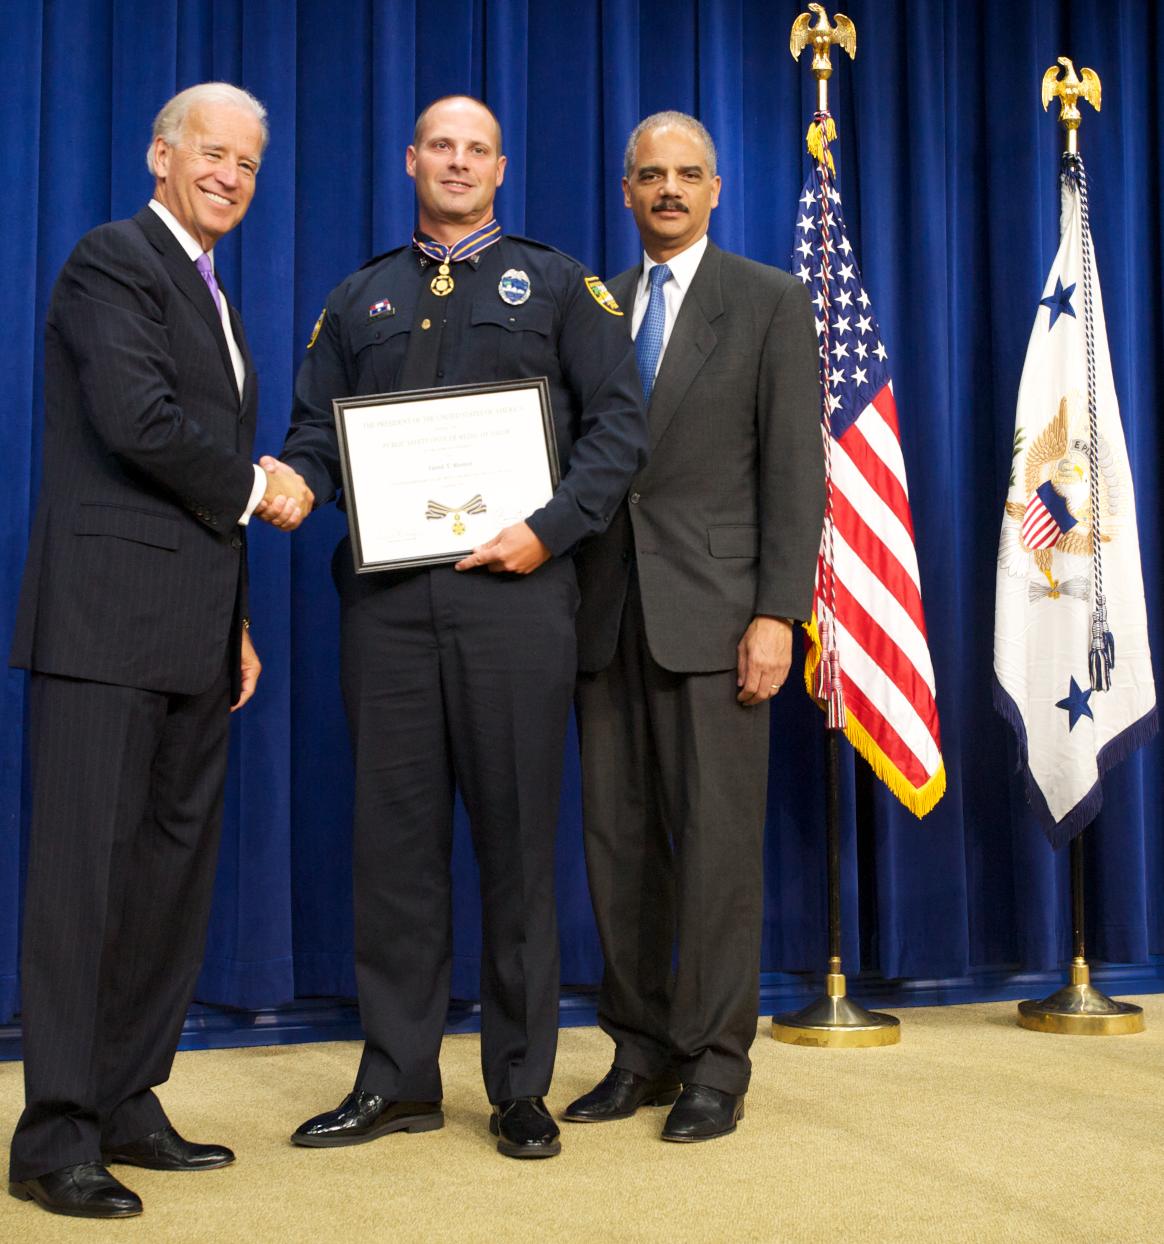 Three men standing in front of flags on a stage and facing the camera. The man in the middle is wearing an officer uniform and holding a Medal of Valor award plaque.